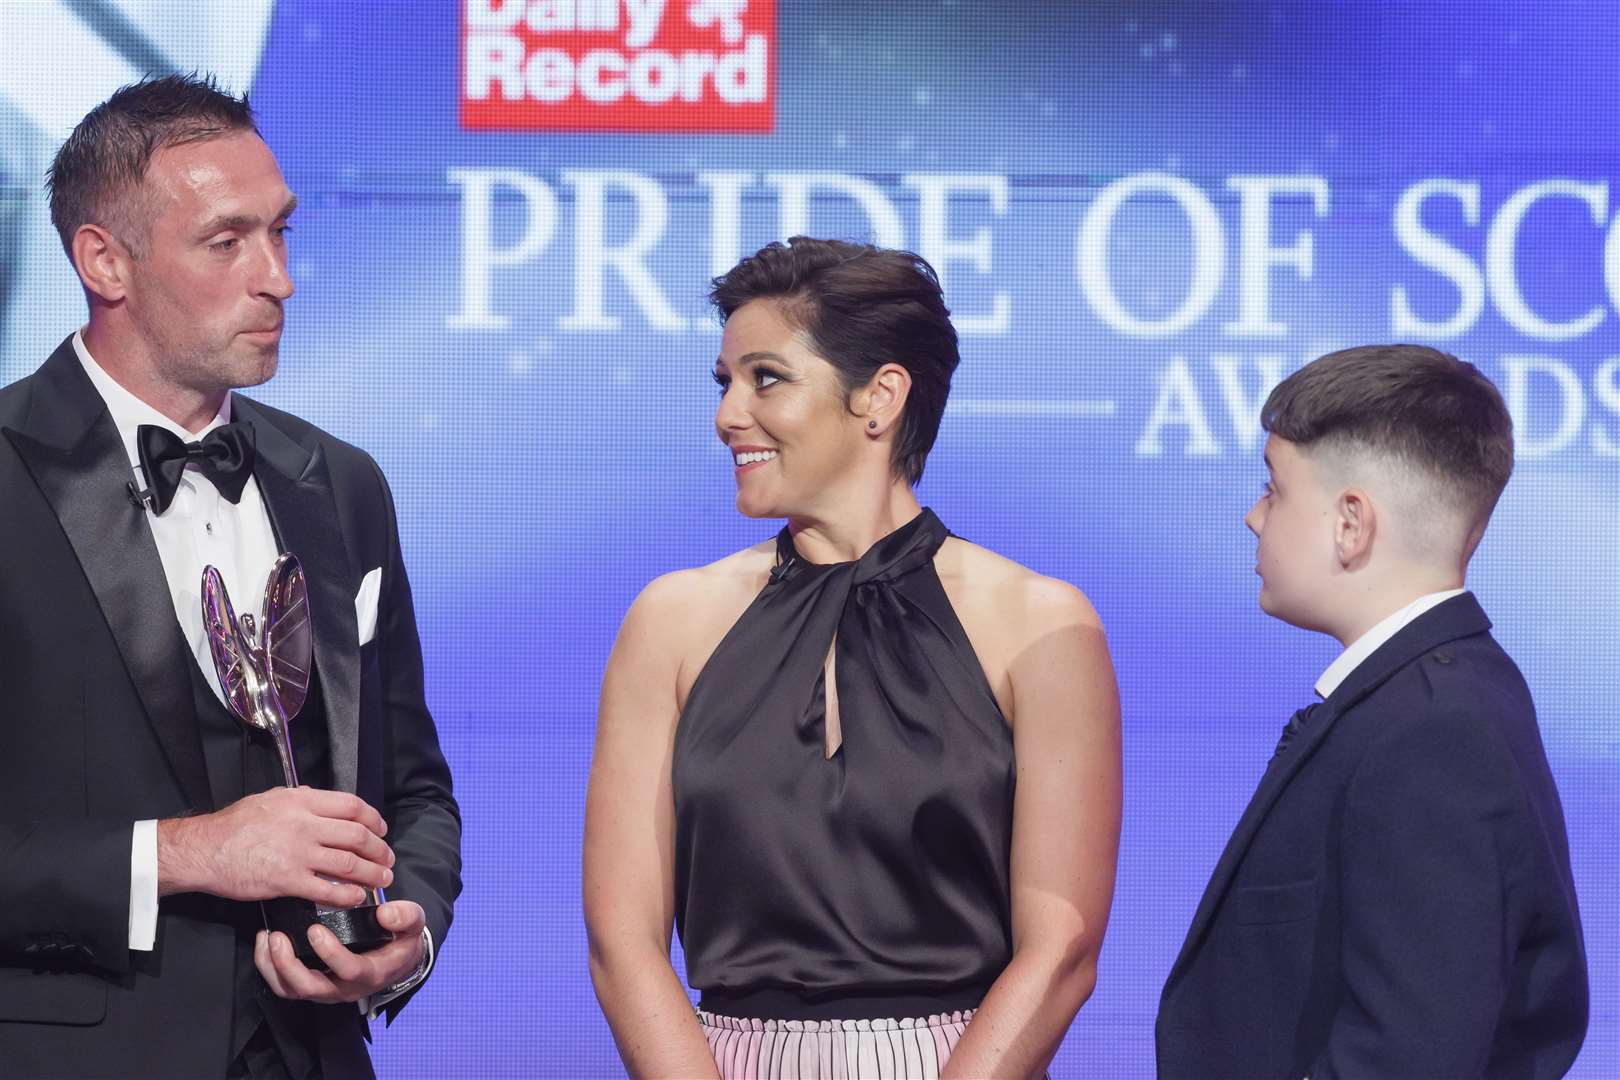 Keiran Reid (12), of Avoch, is honoured as a Child of Courage in The Daily Record Pride of Scotland Awards.